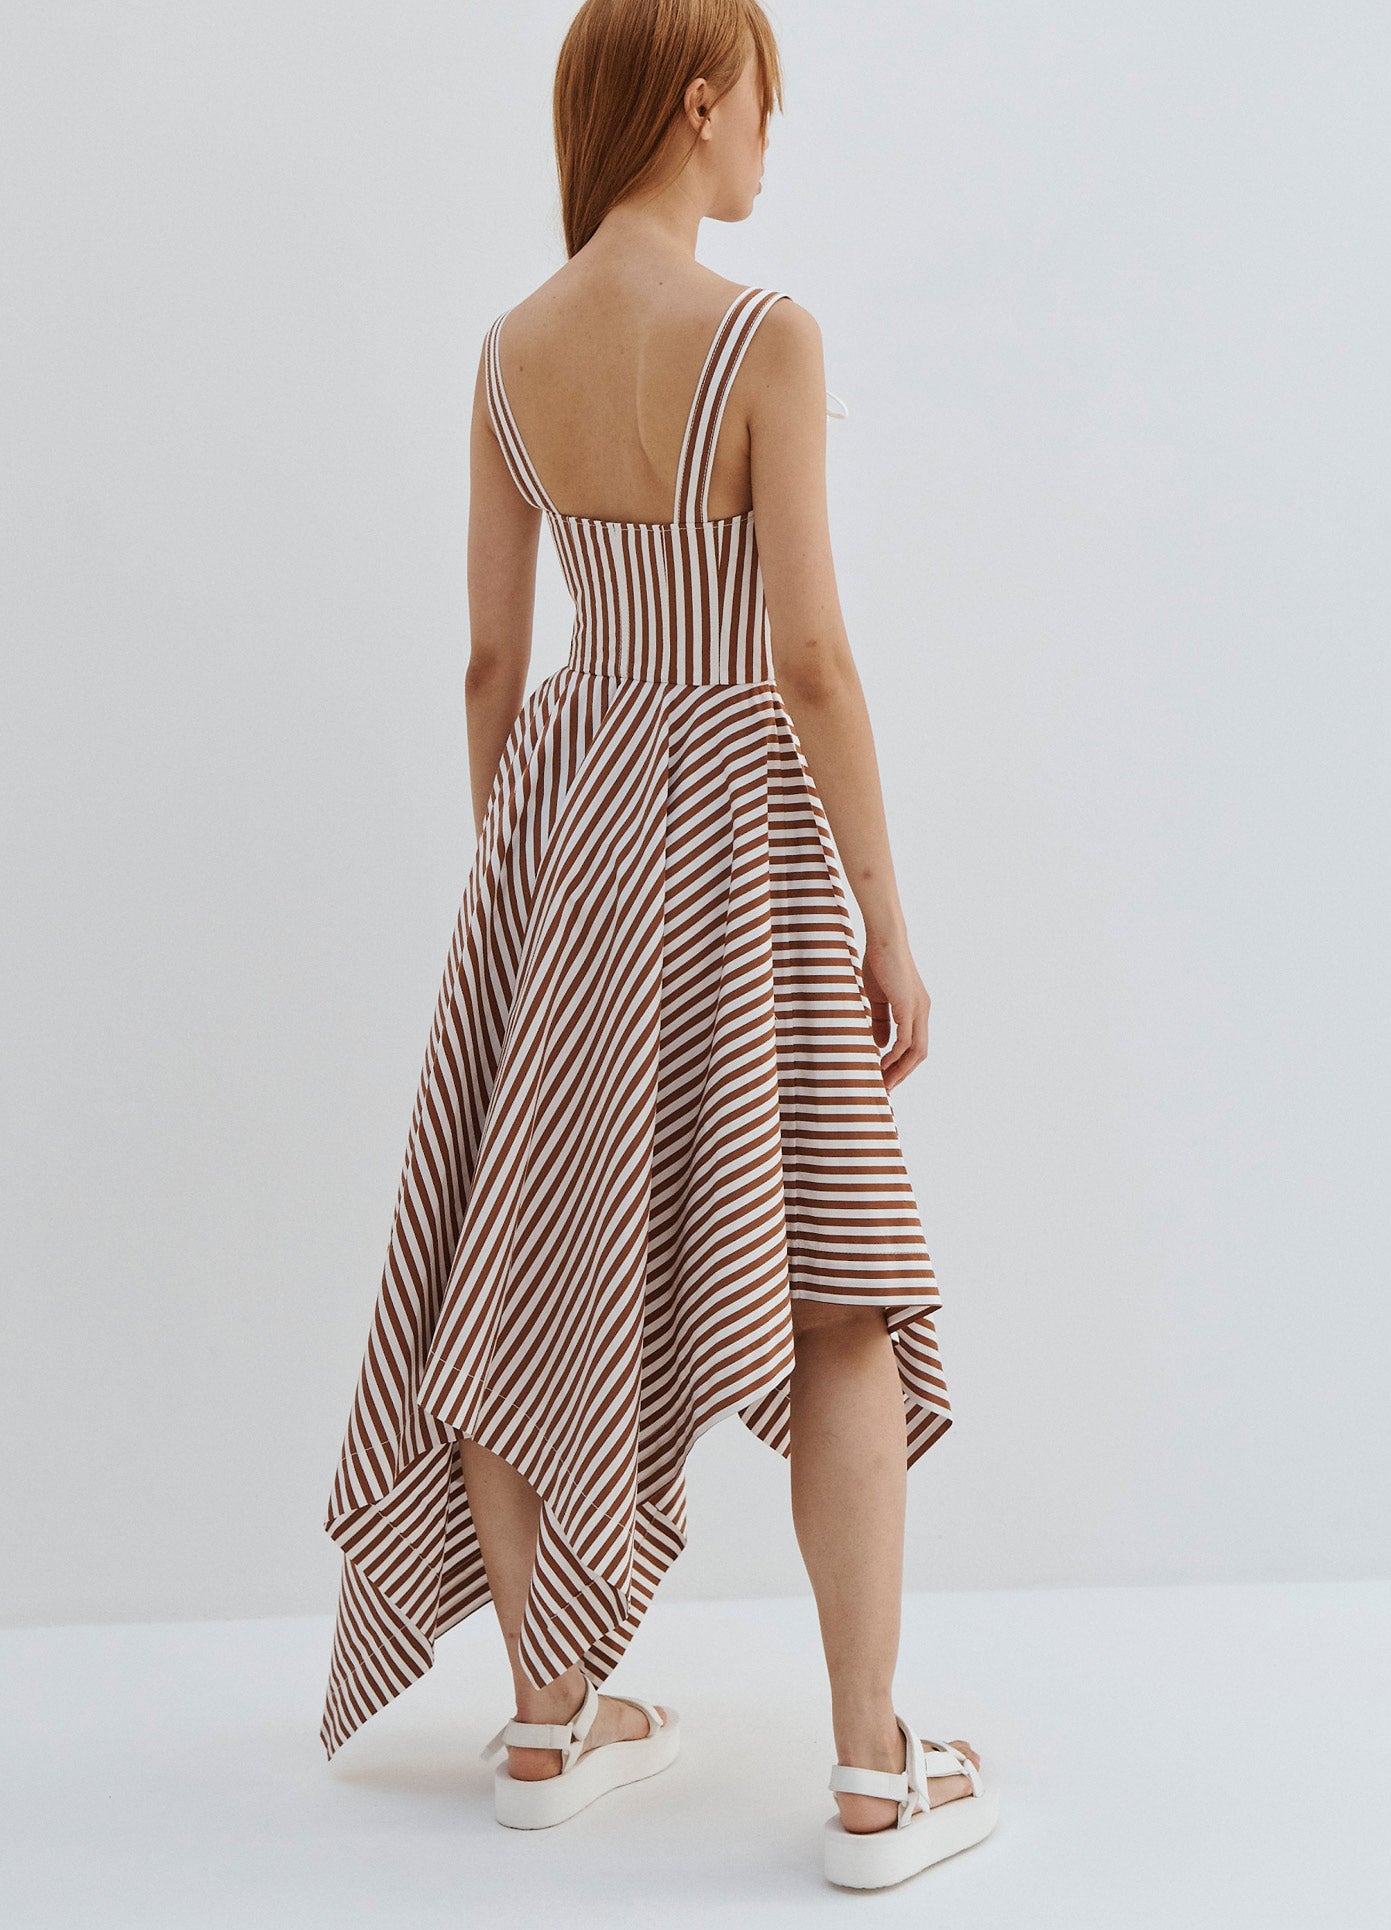 MONSE Striped Laced Front Sleeveless Dress in Brown and Ivory on Model Full Back Side View